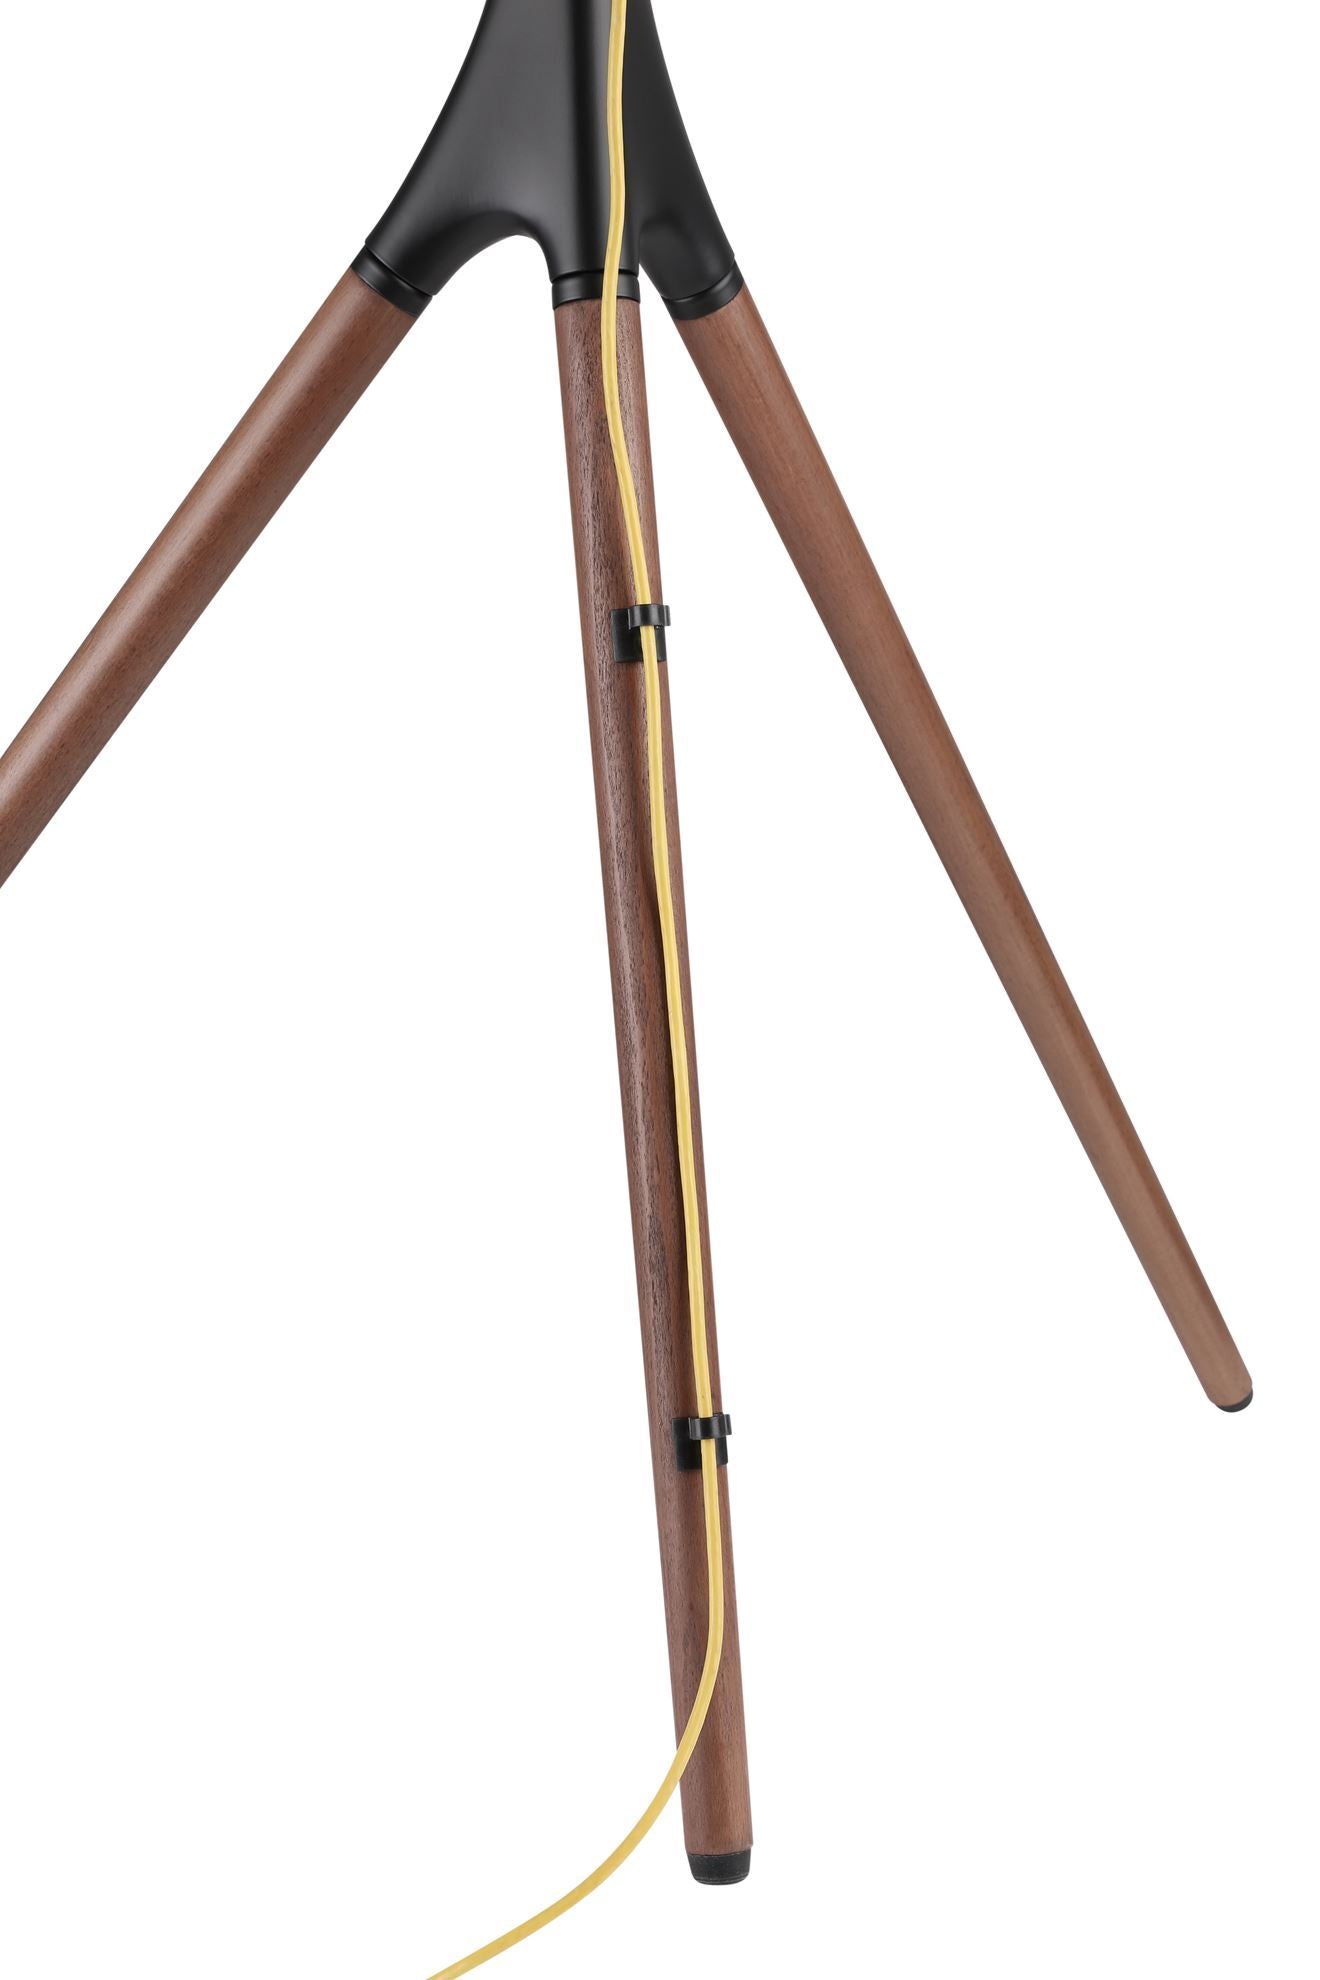 BRATECK 45-65" Artistic Easel Studio TV Floor Stand. Includes Anti-slip Rubber Pads. Weight Capacity up to 32kgs